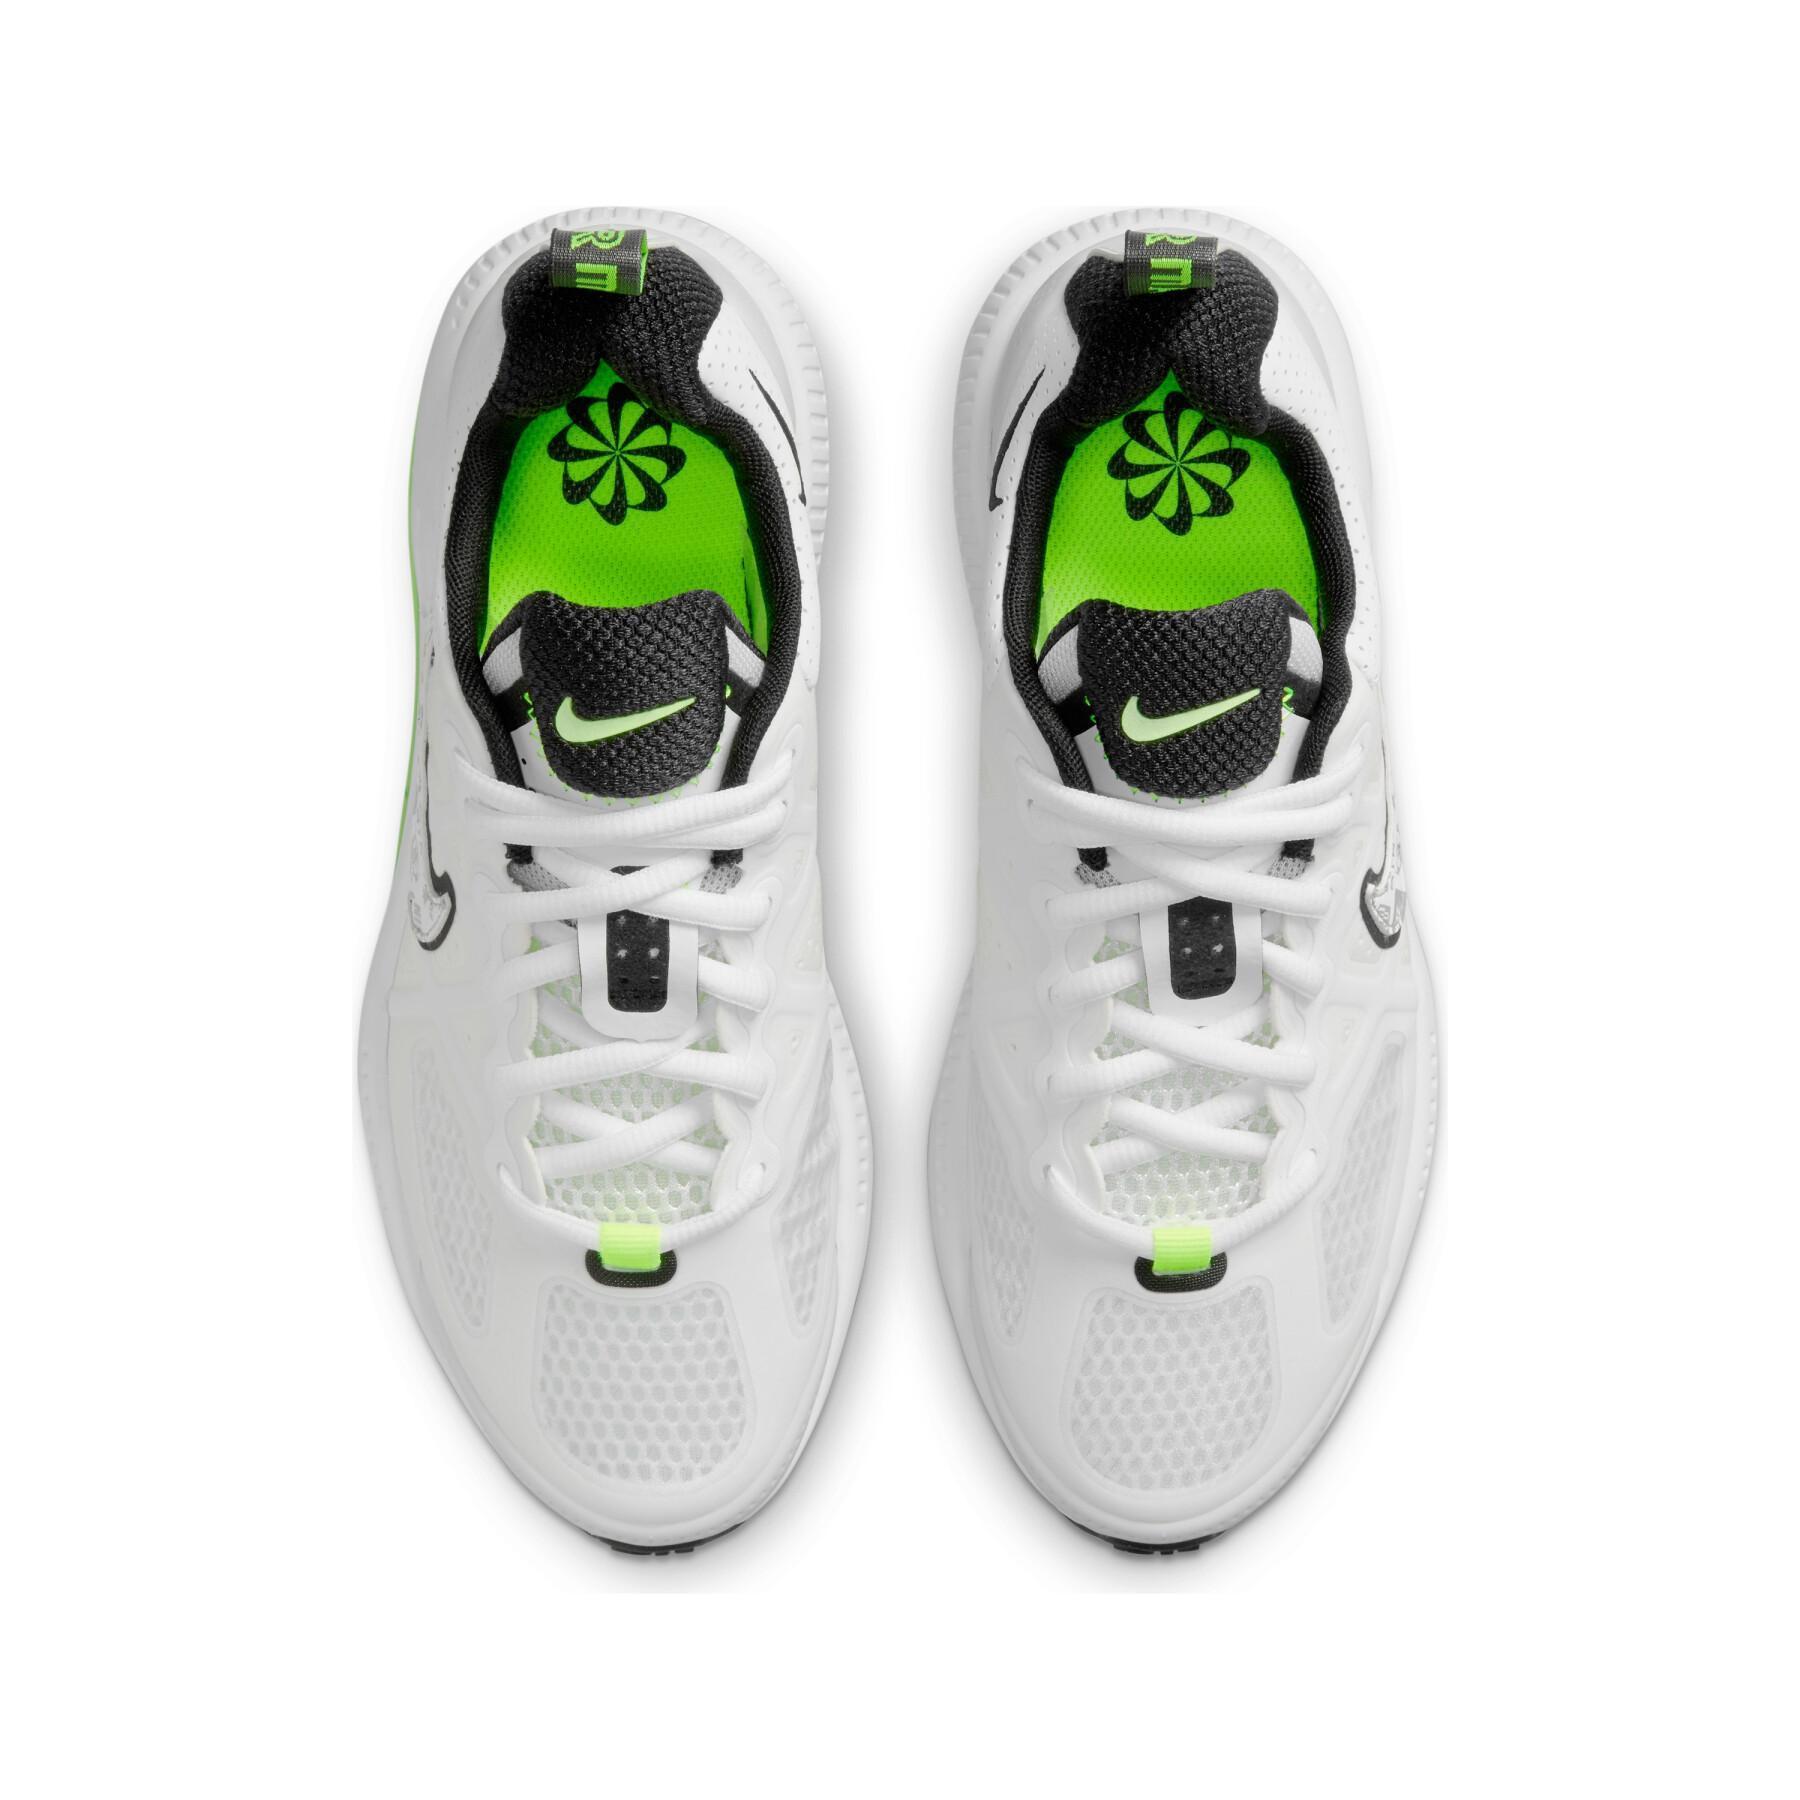 Children's shoes Nike Air Max Genome